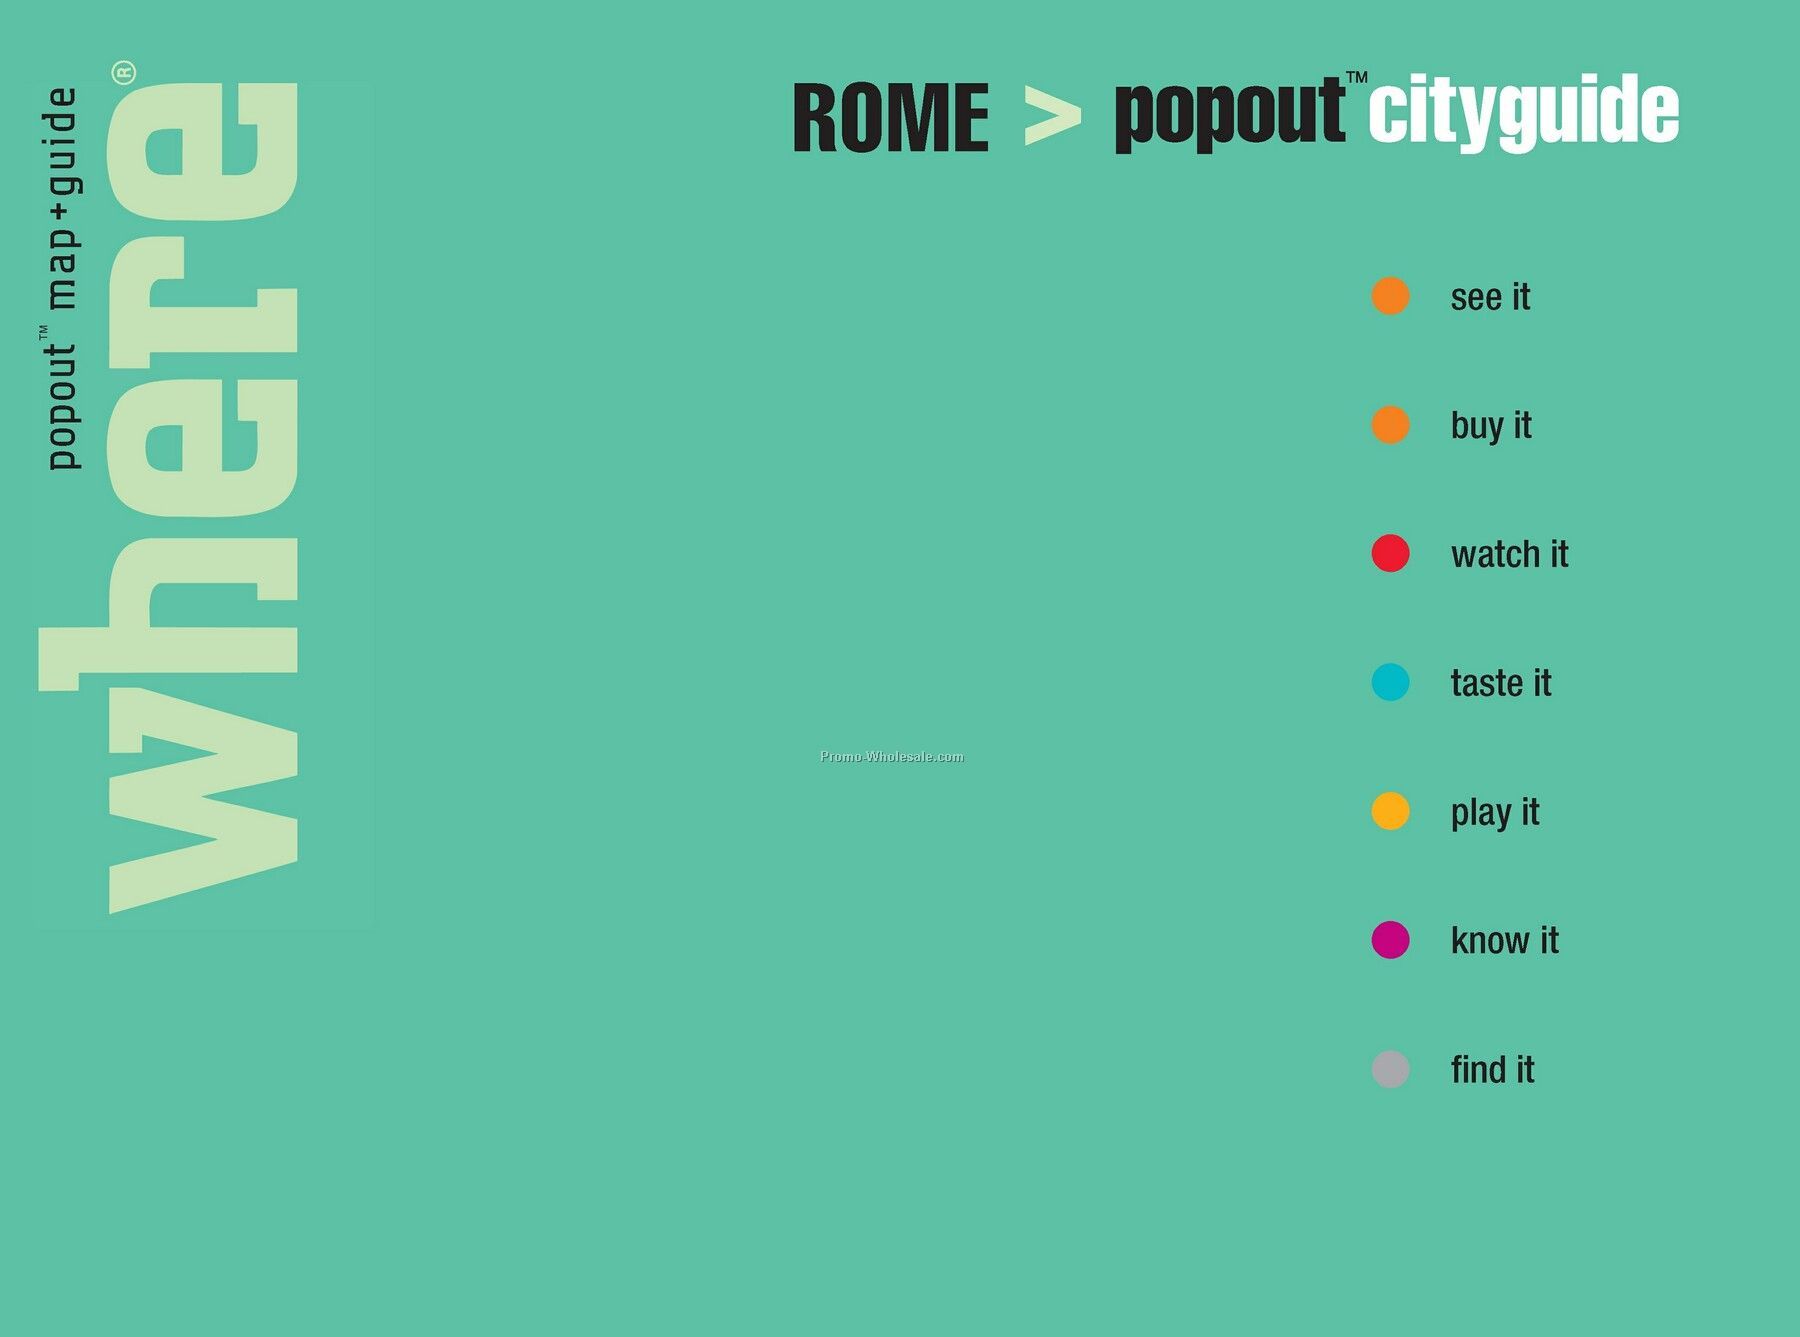 Travel Guides - International Guide Of Rome - Featuring Popout Maps